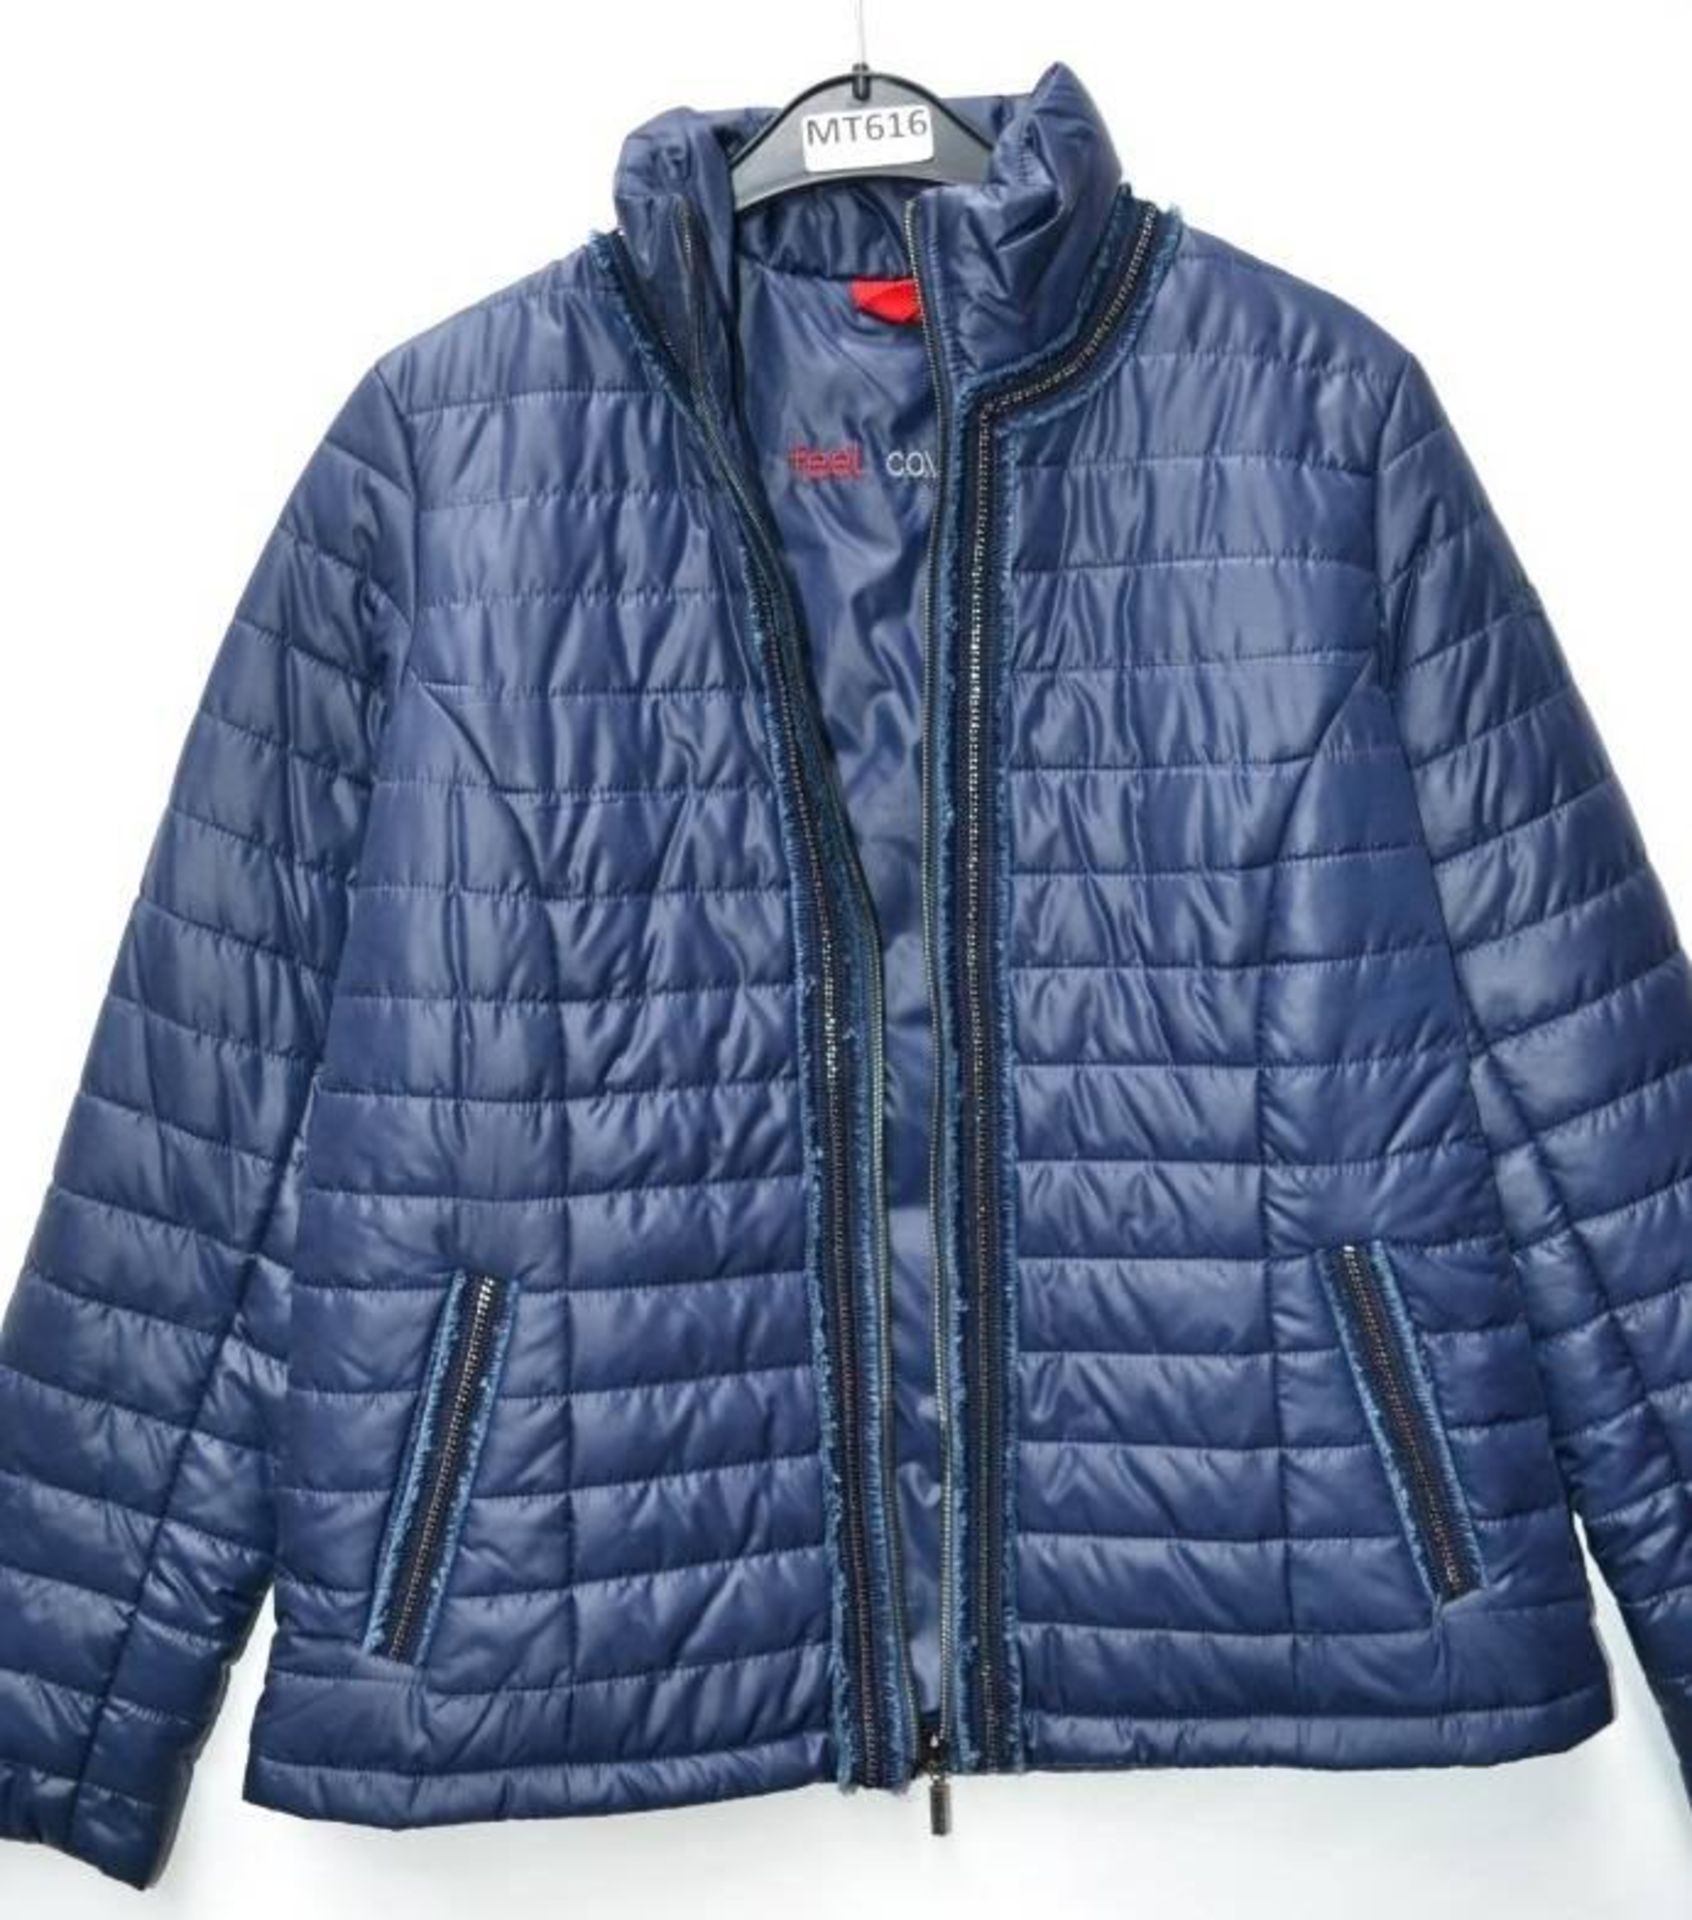 1 x Steilmann Feel C.o.v.e.r By Kirsten Womens Coat - Quilted Poly Down Filled Coat In Navy Blue, Wi - Image 7 of 7